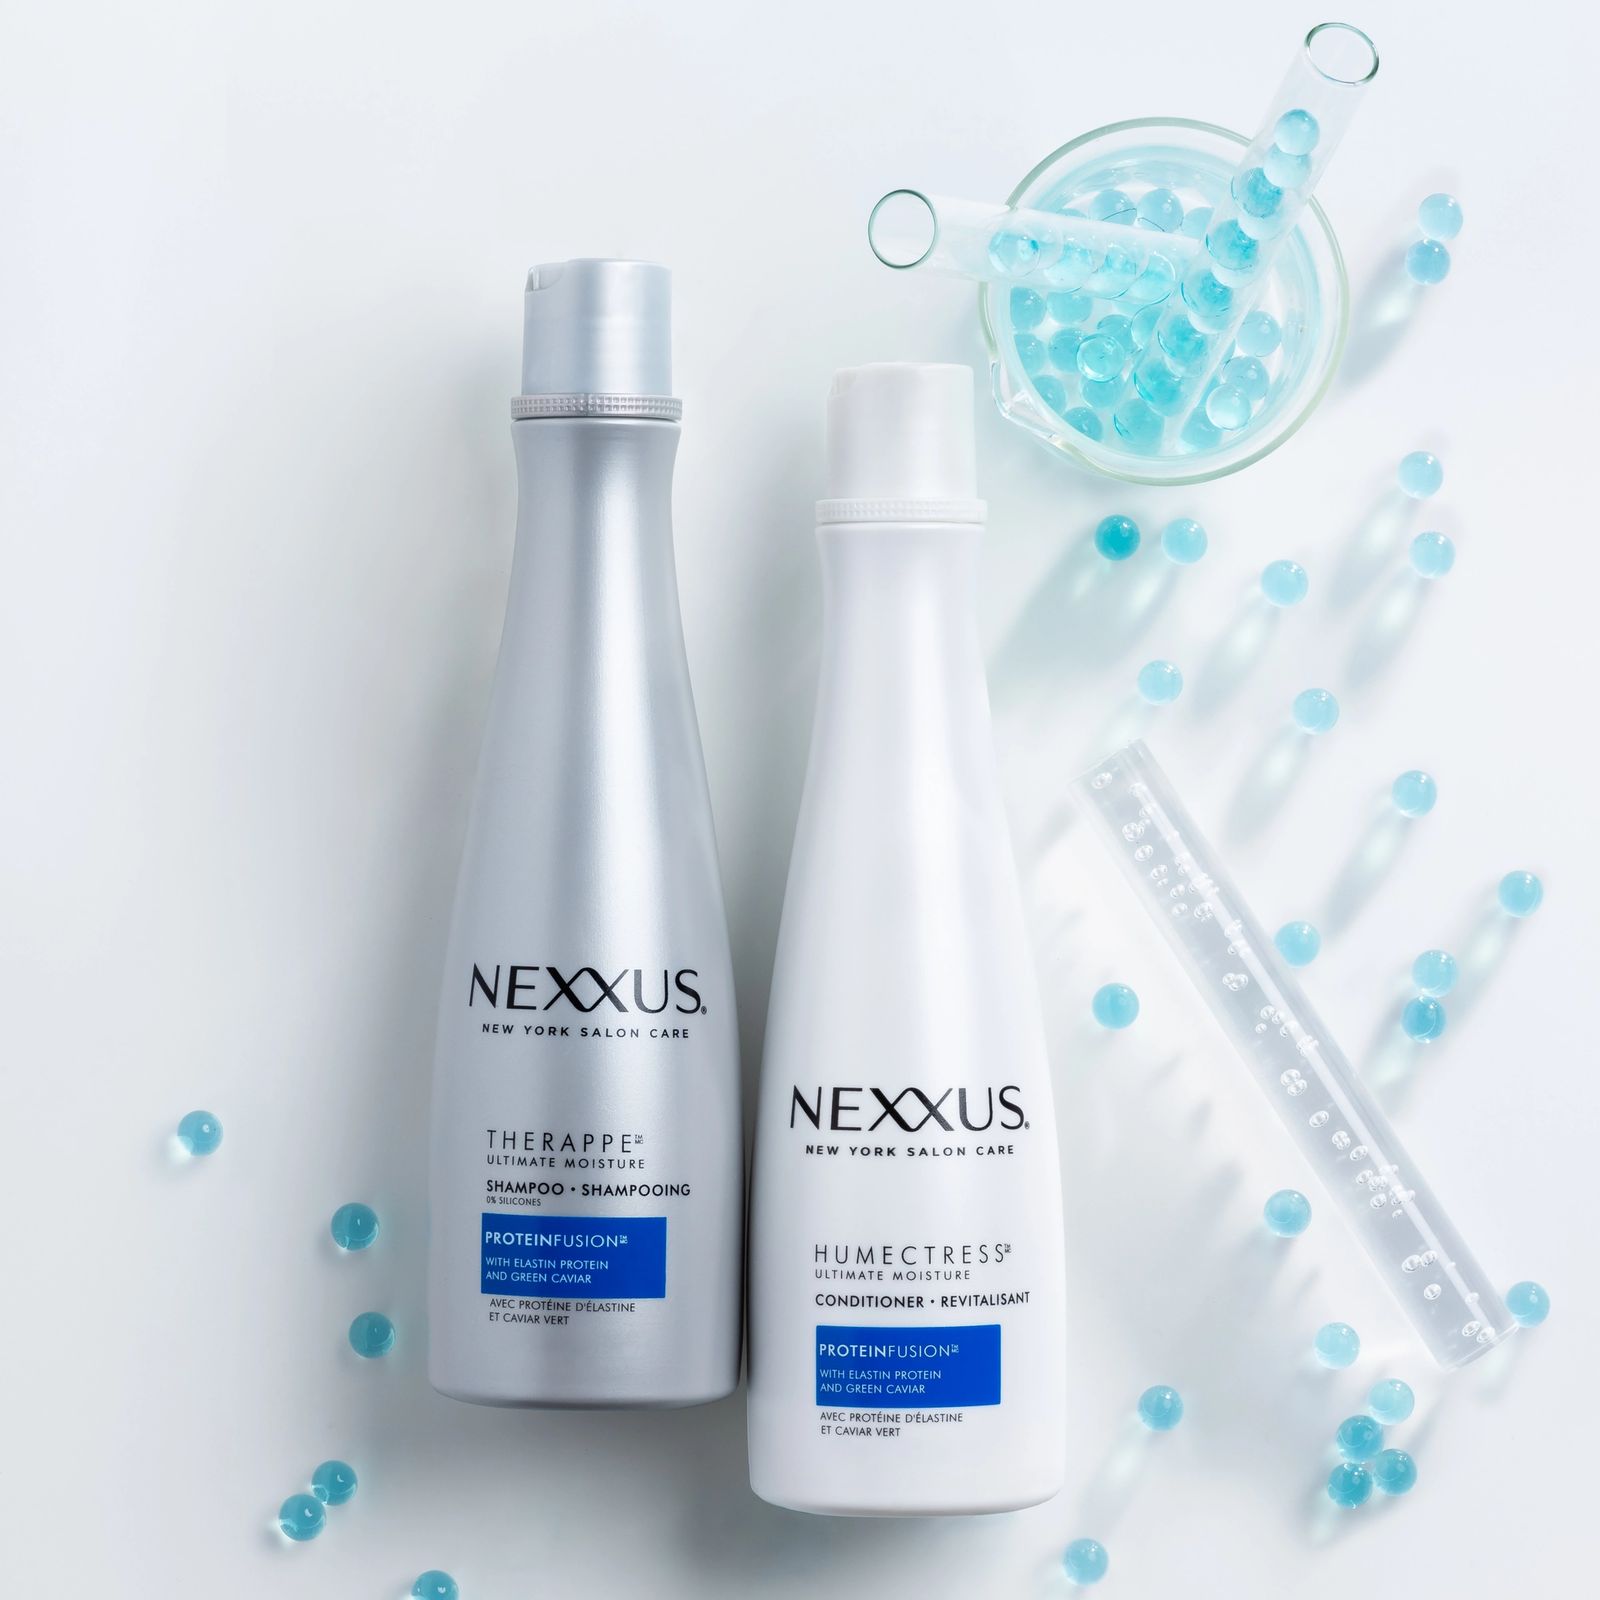 Nexxus Therappe Shampoo & Humectress Conditioner Product Shot